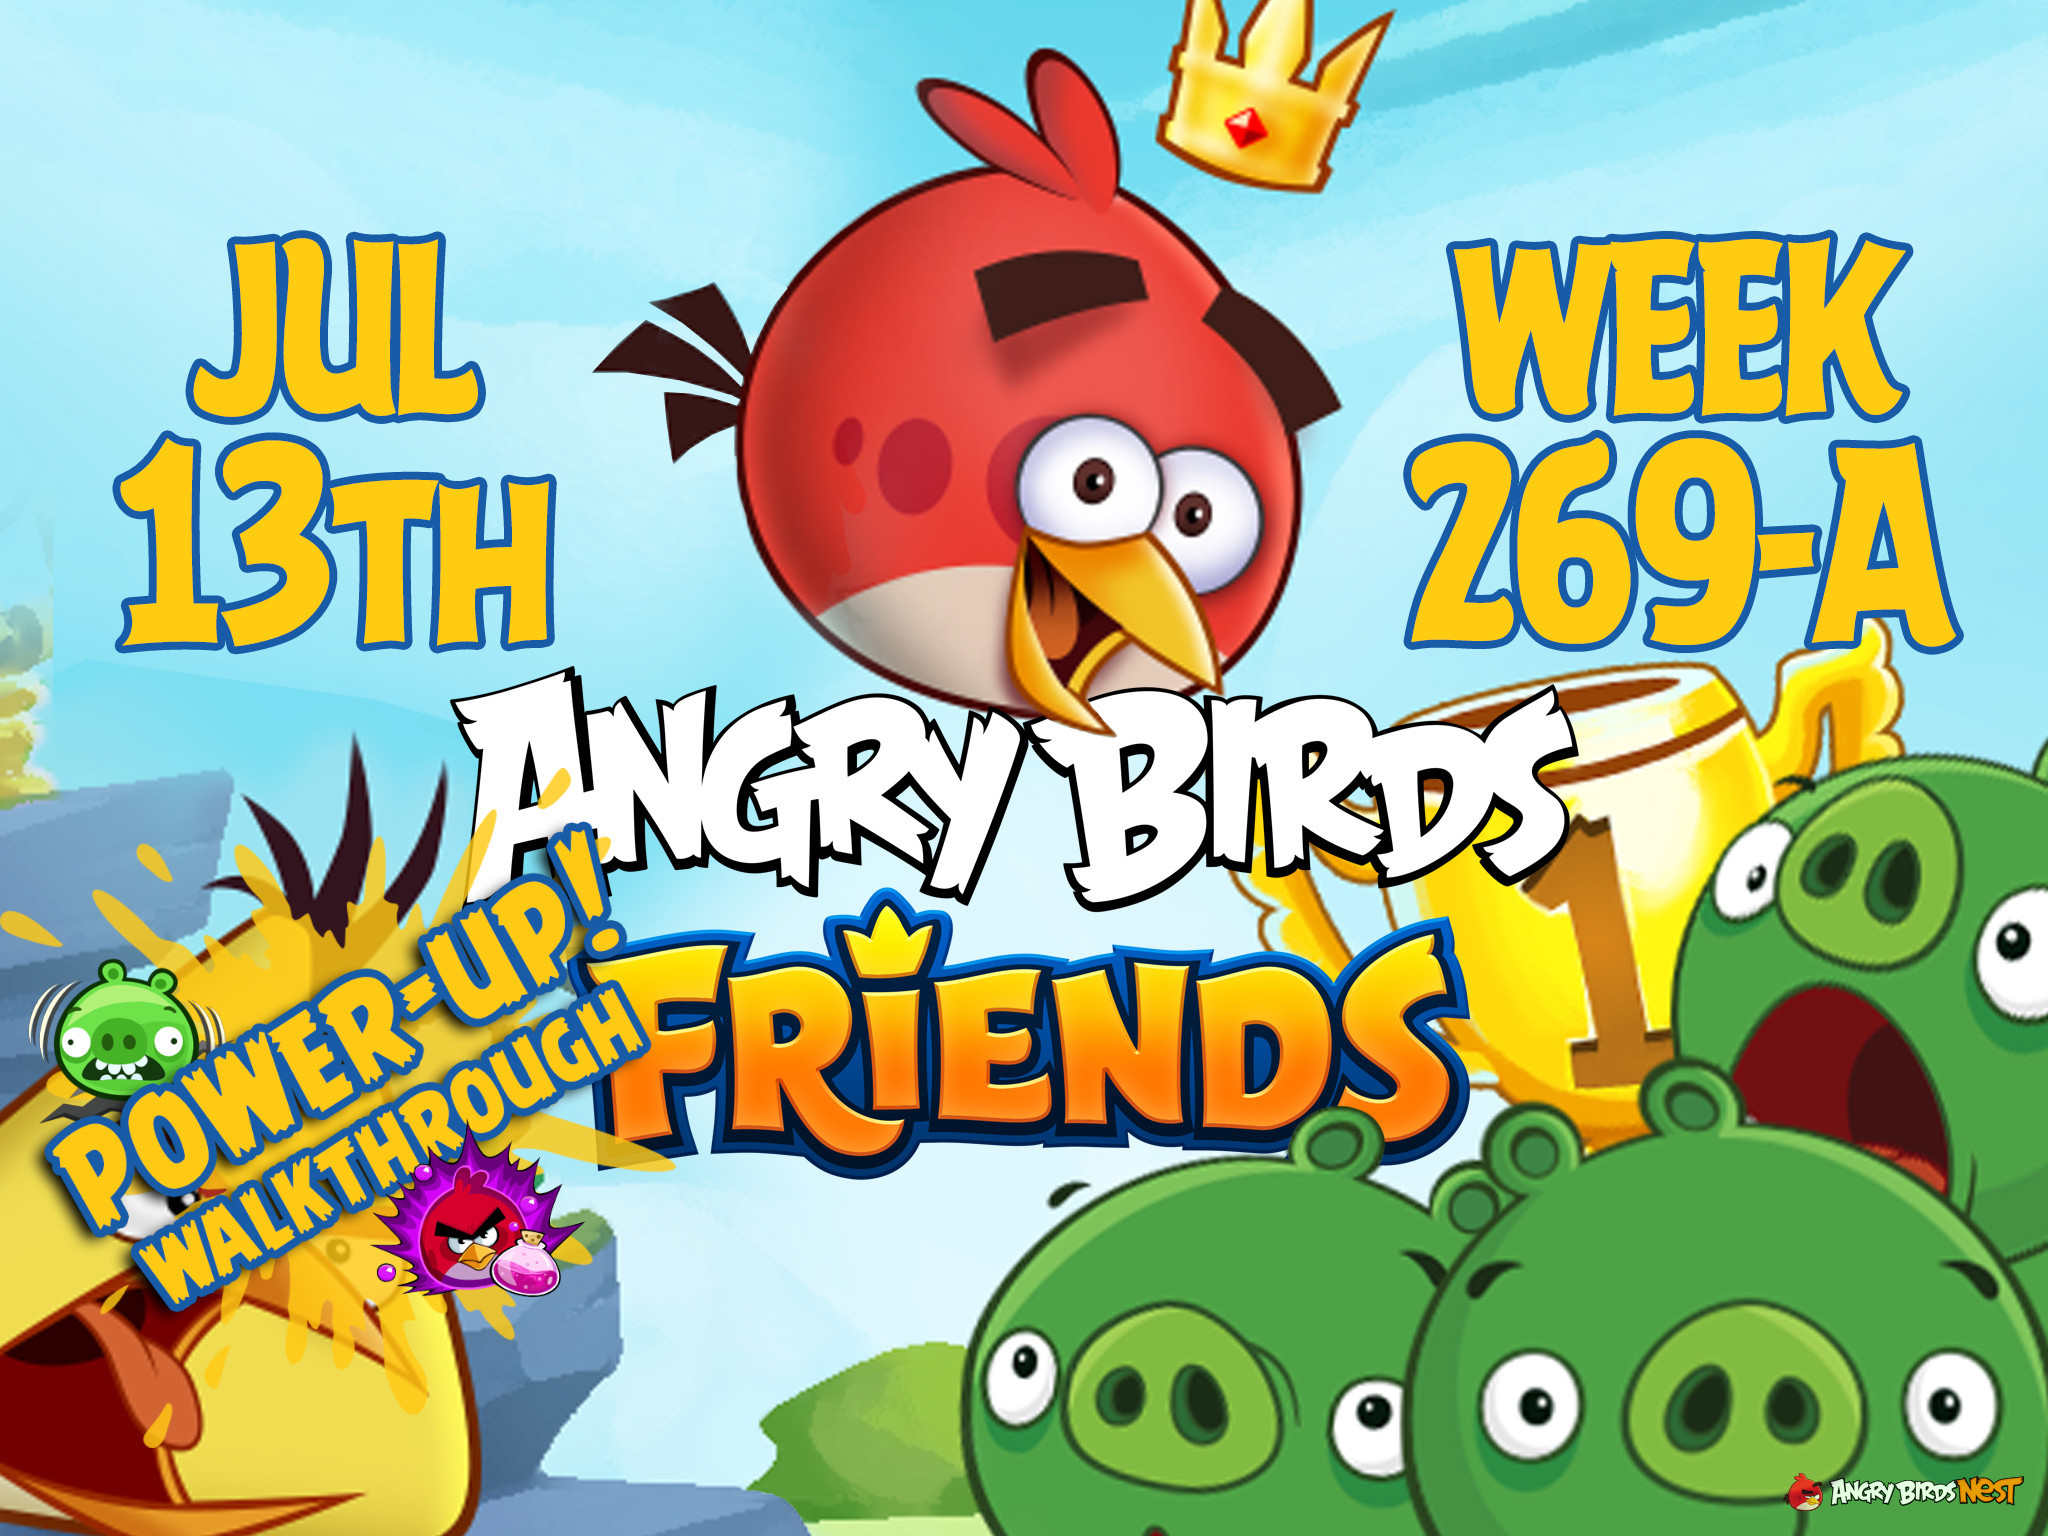 Angry Birds Friends Tournament Week 269-A Feature Image PU